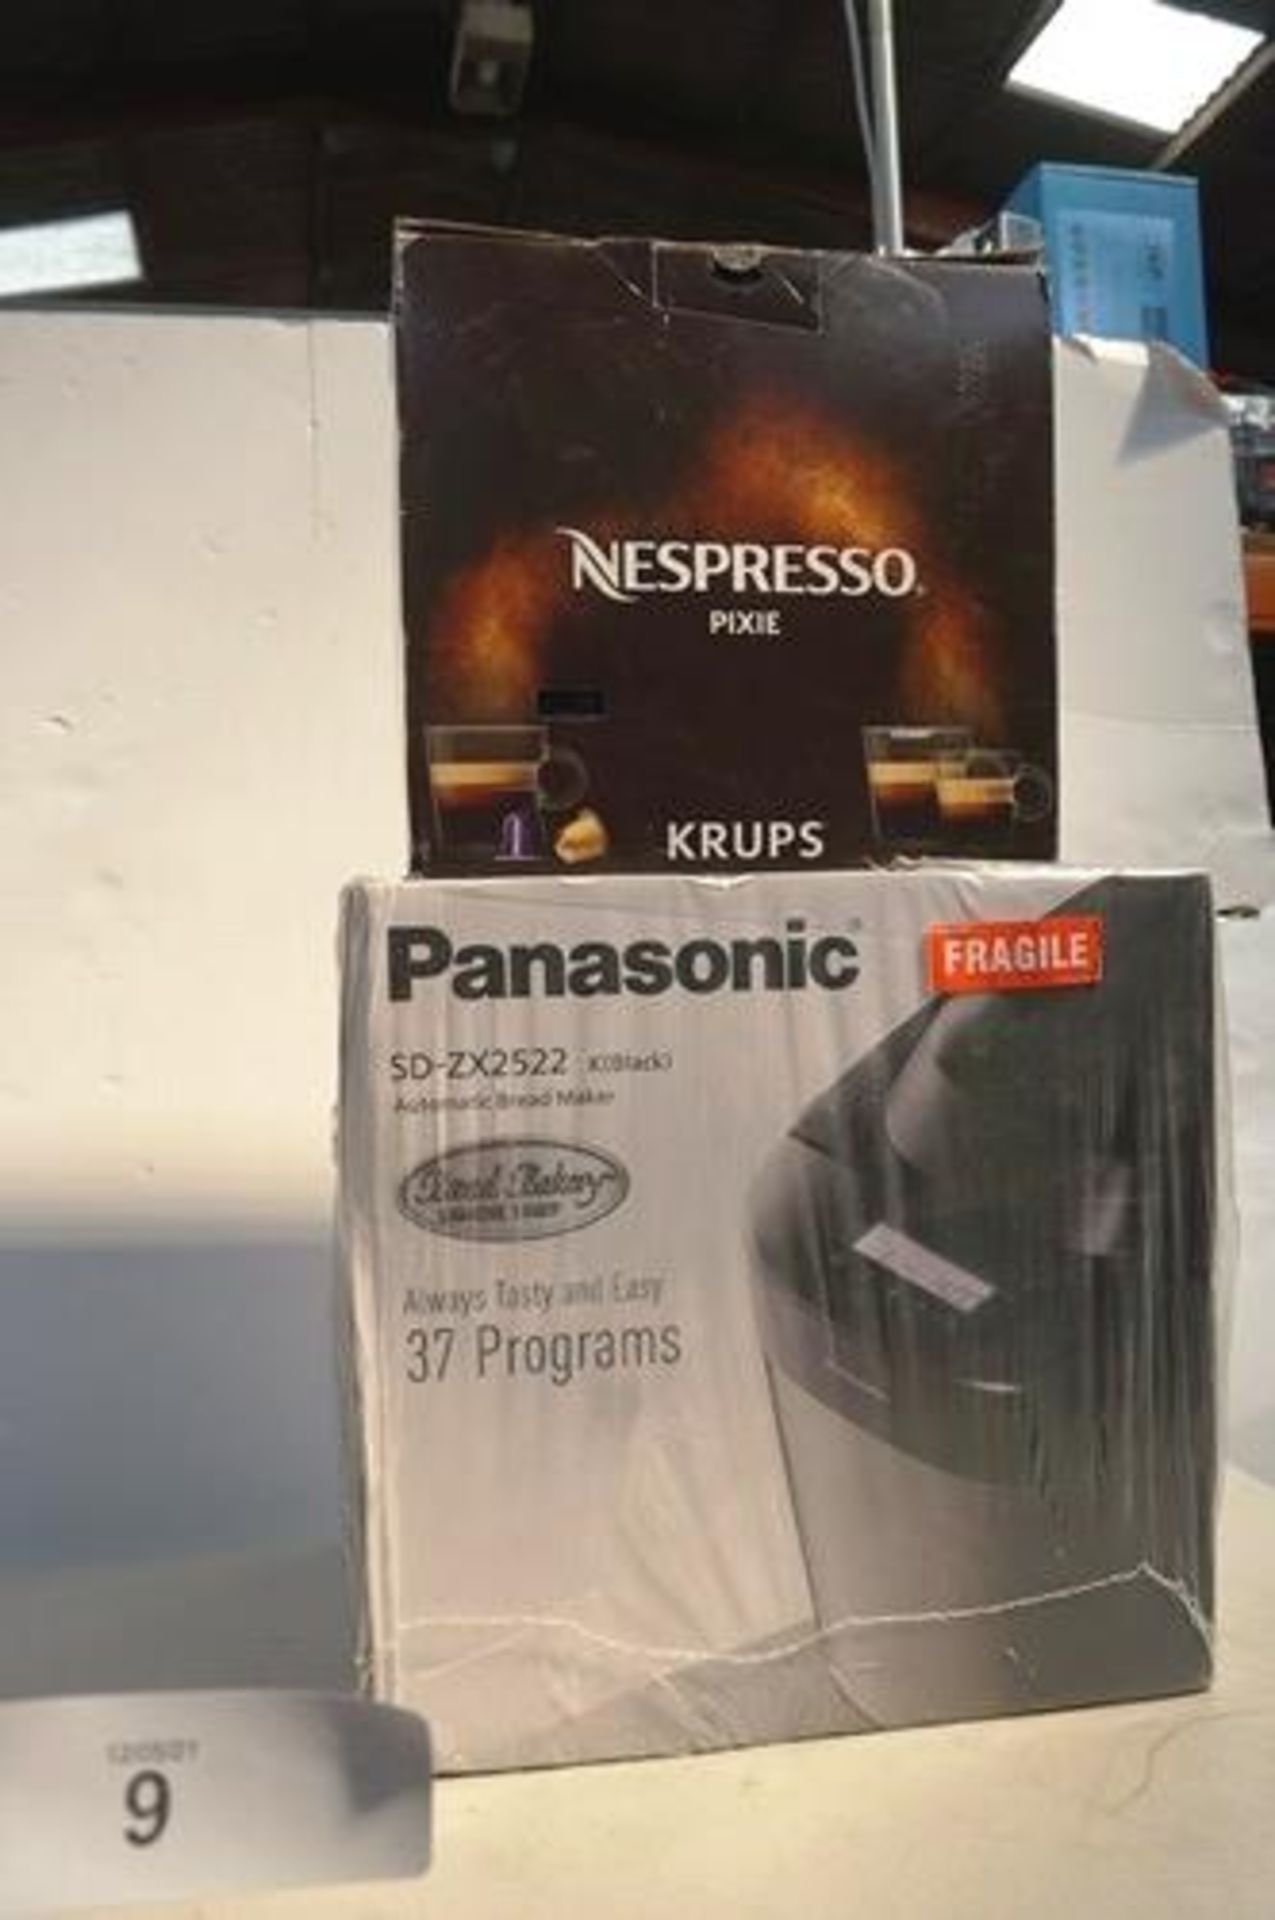 1 x Panasonic automatic bread maker, model SD-ZX2522, new, together with 1 x Nespresso Pixie